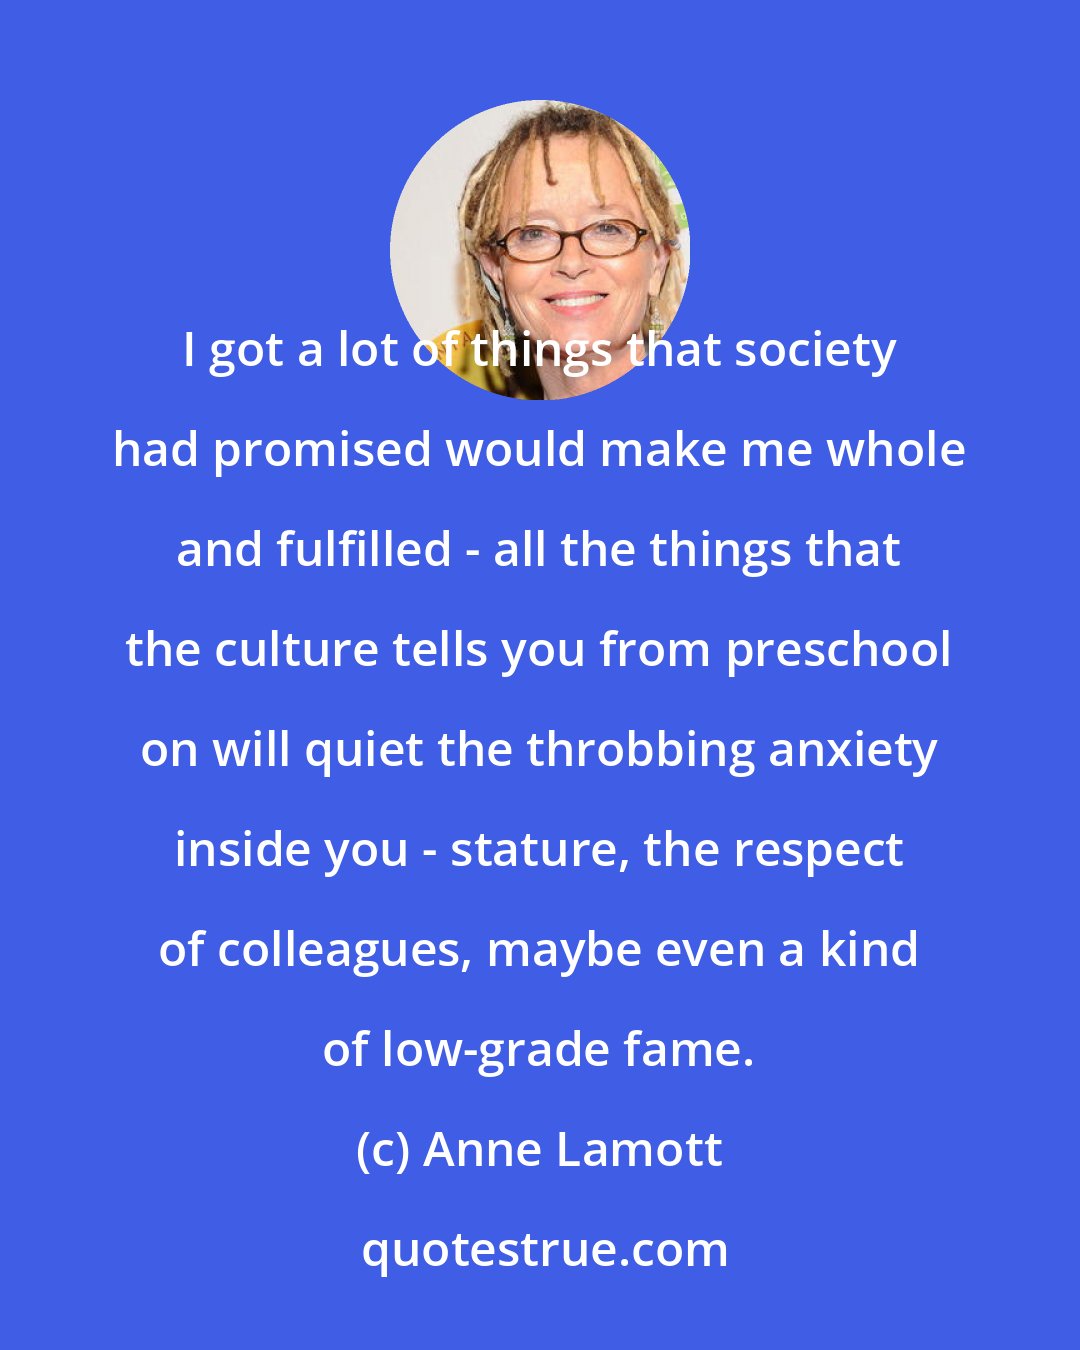 Anne Lamott: I got a lot of things that society had promised would make me whole and fulfilled - all the things that the culture tells you from preschool on will quiet the throbbing anxiety inside you - stature, the respect of colleagues, maybe even a kind of low-grade fame.